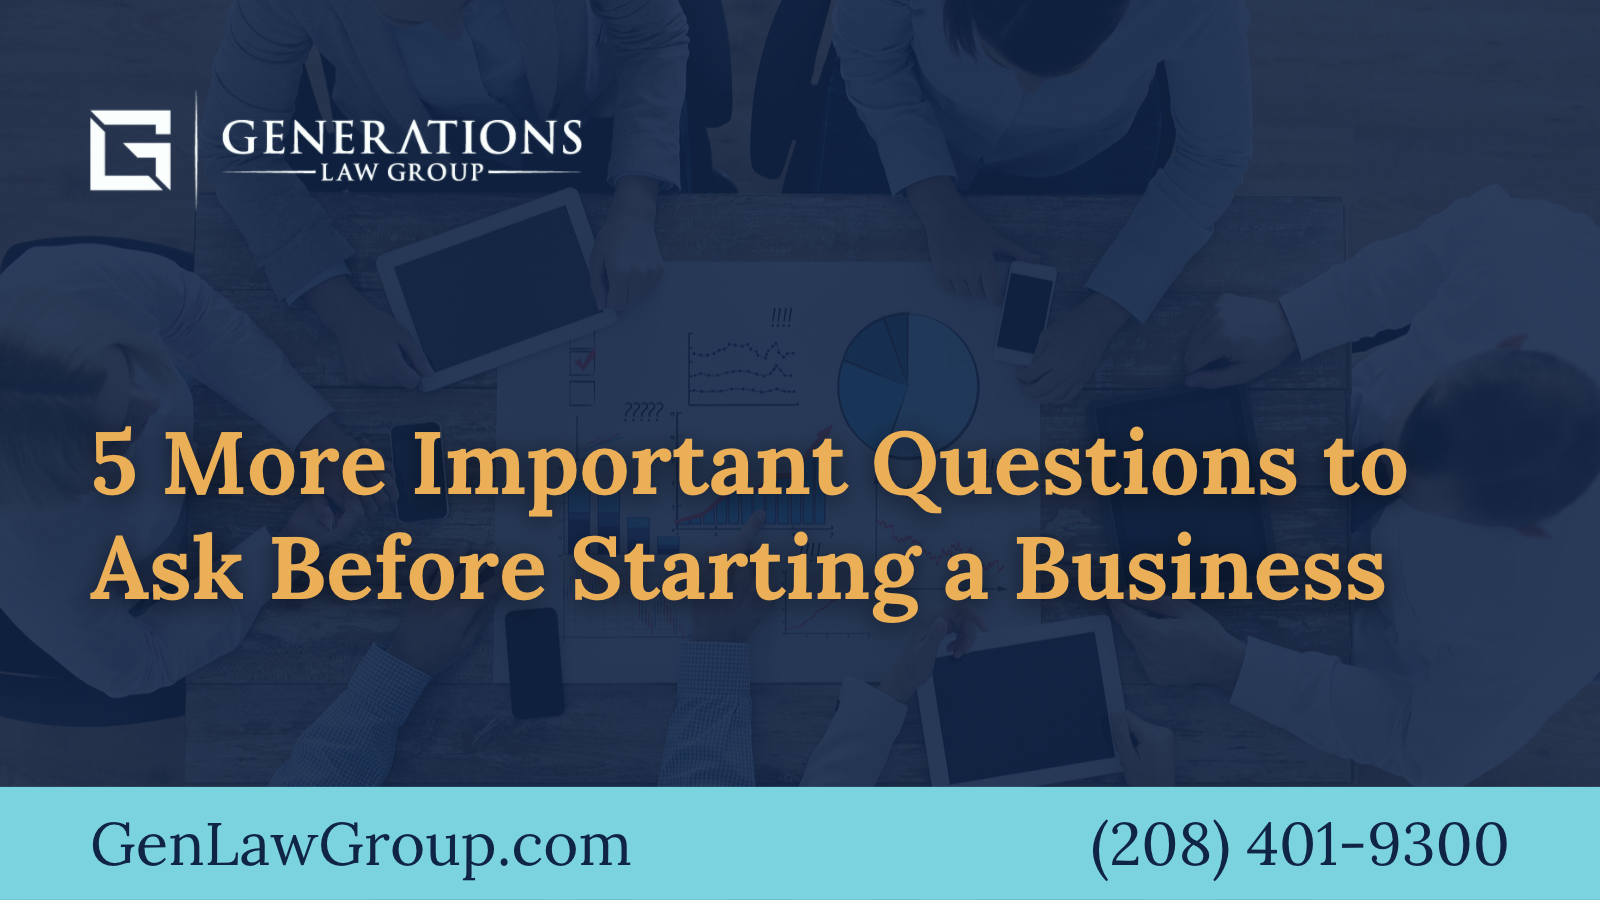 5 More Important Questions to Ask Before Starting a Business